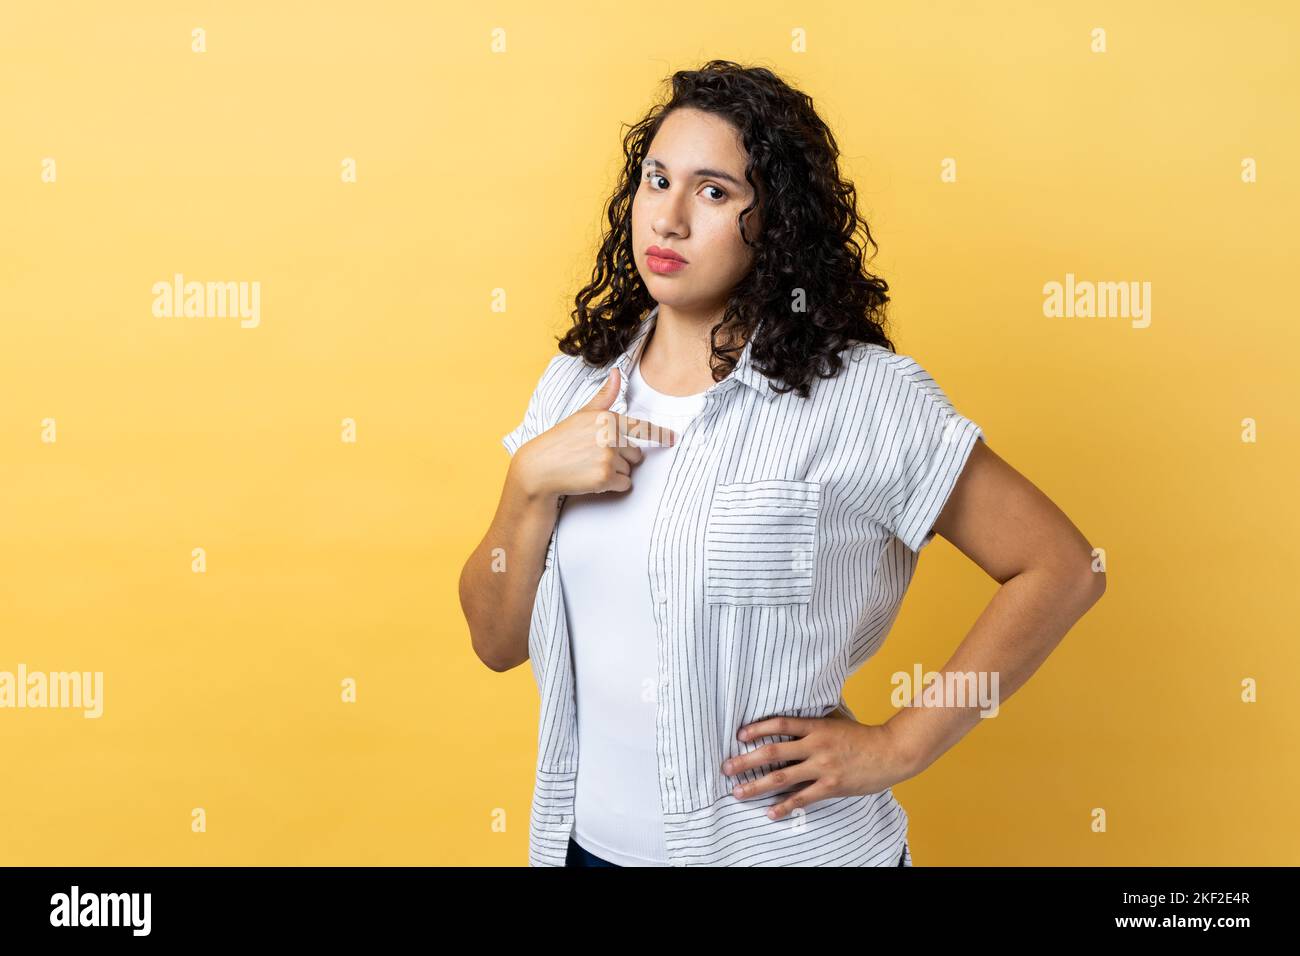 Portrait of confident woman with dark wavy hair pointing at herself, feeling proud and self-important, keeps hand on hip, having big ego. Indoor studio shot isolated on yellow background. Stock Photo